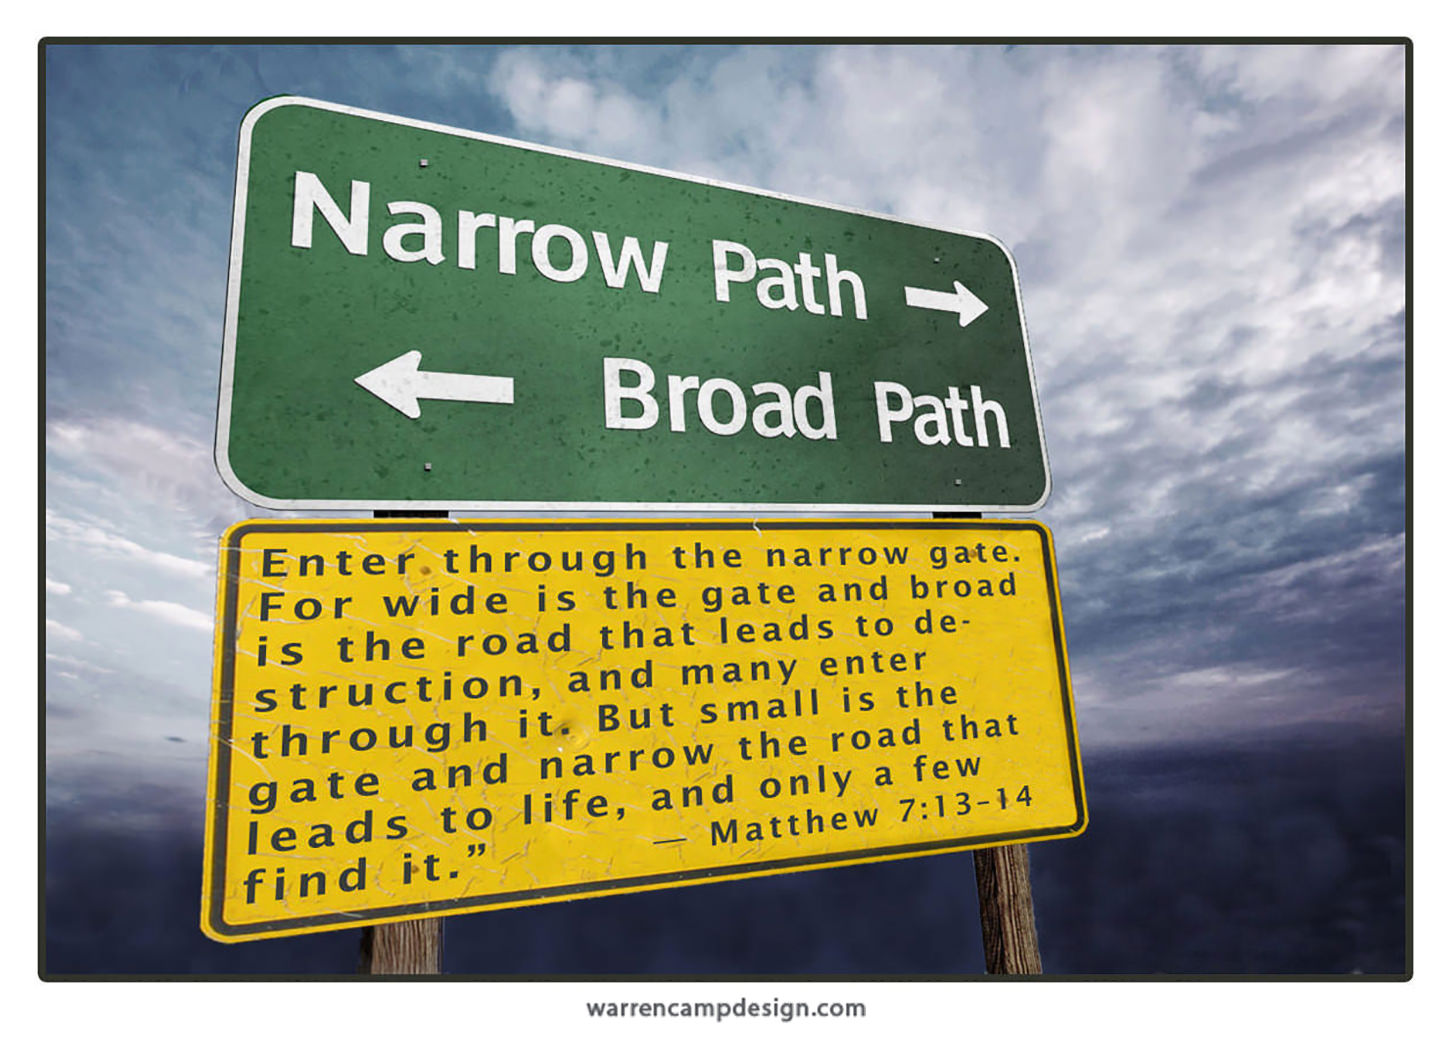 Scripture picture of Matthew 7:13-14, emphasizing the choice between the broad and narrow openings to Jesus